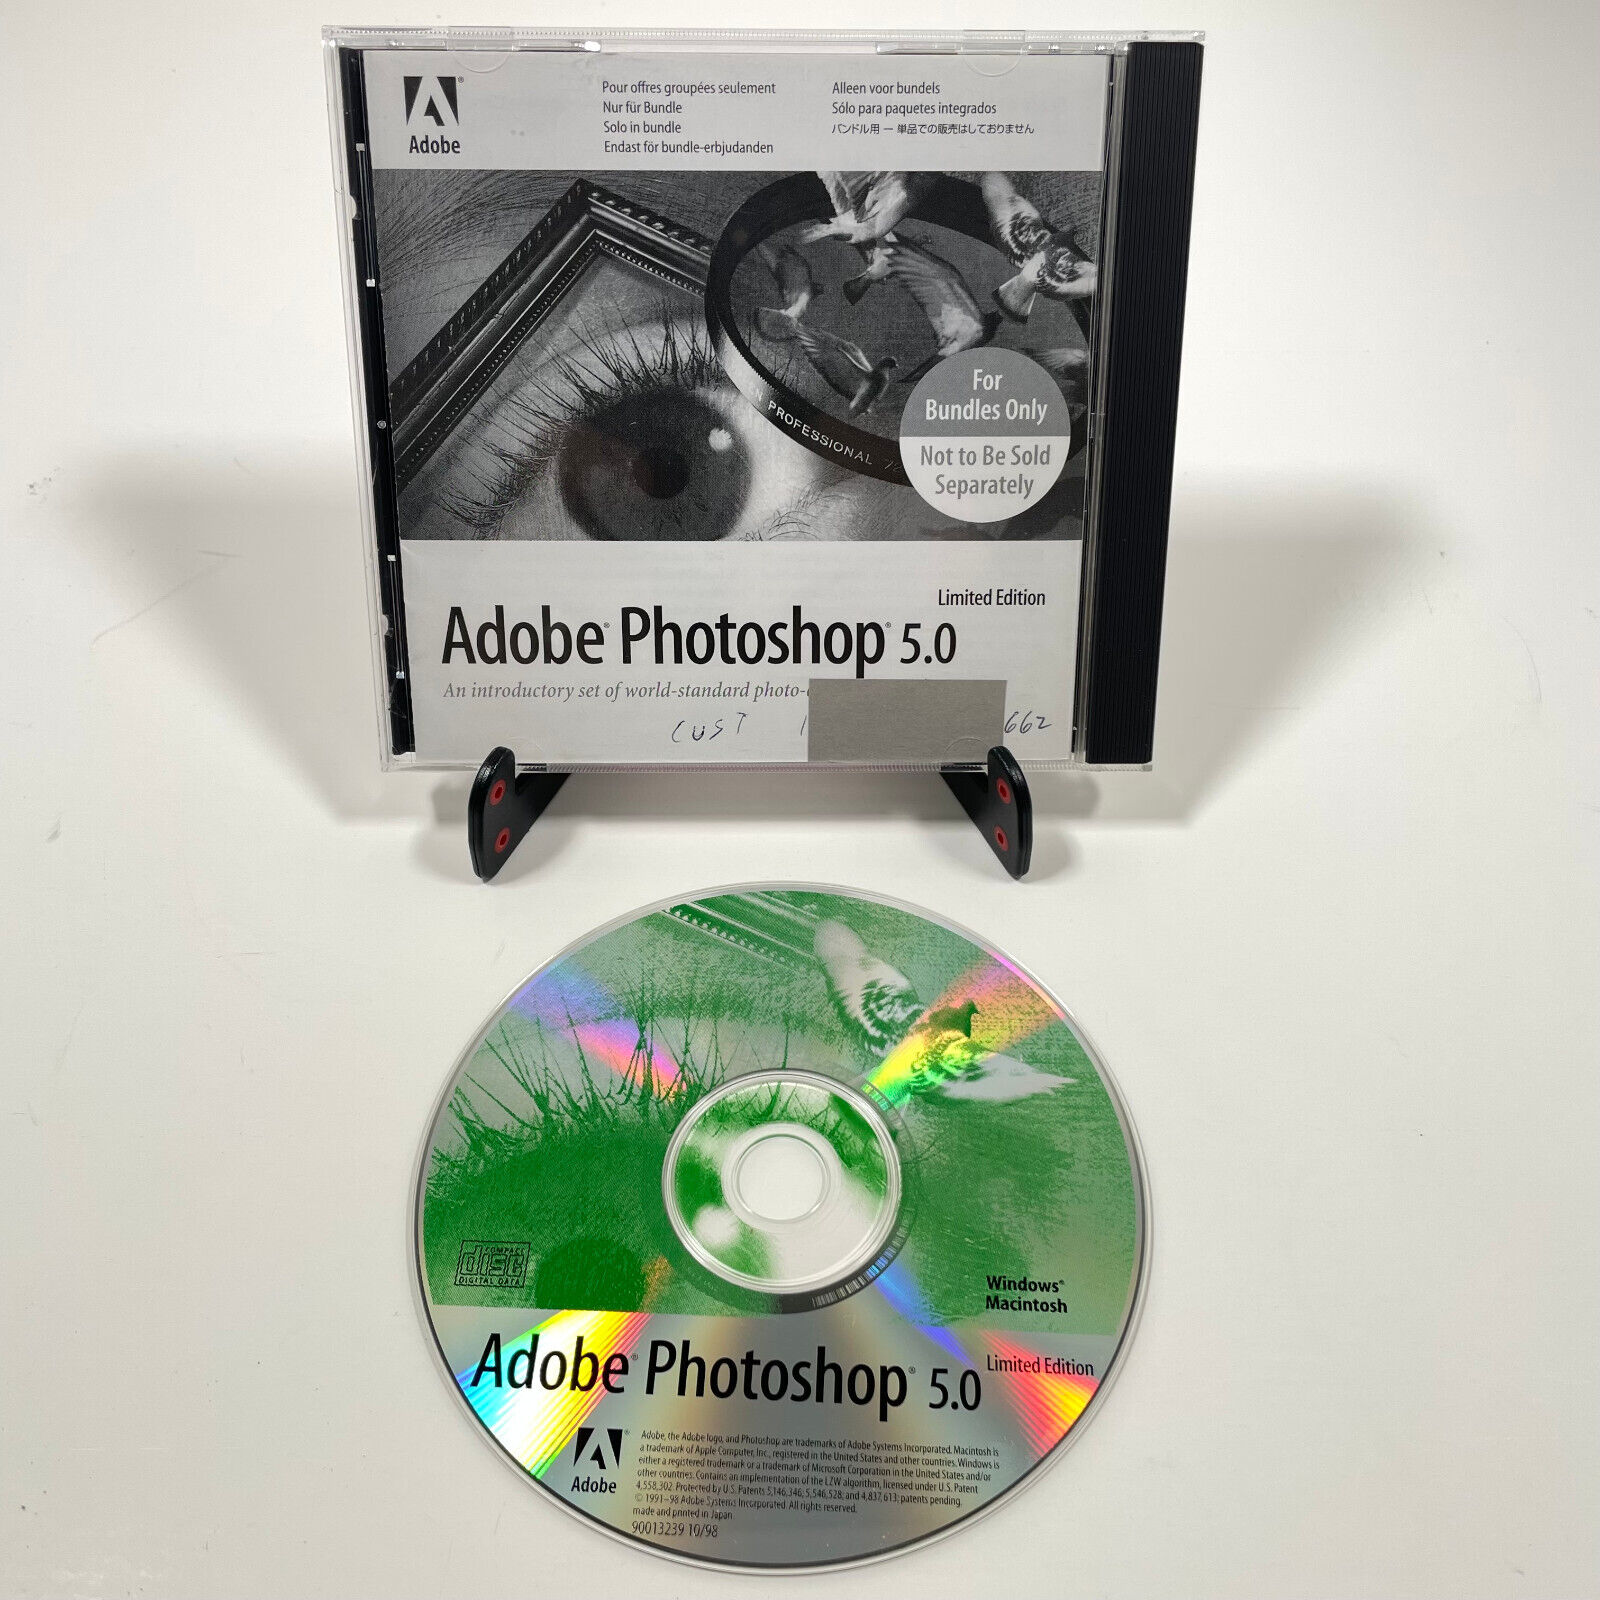 Adobe Photoshop 5.0 Limited Edition (PC / Mac, 1998) w/ Serial number